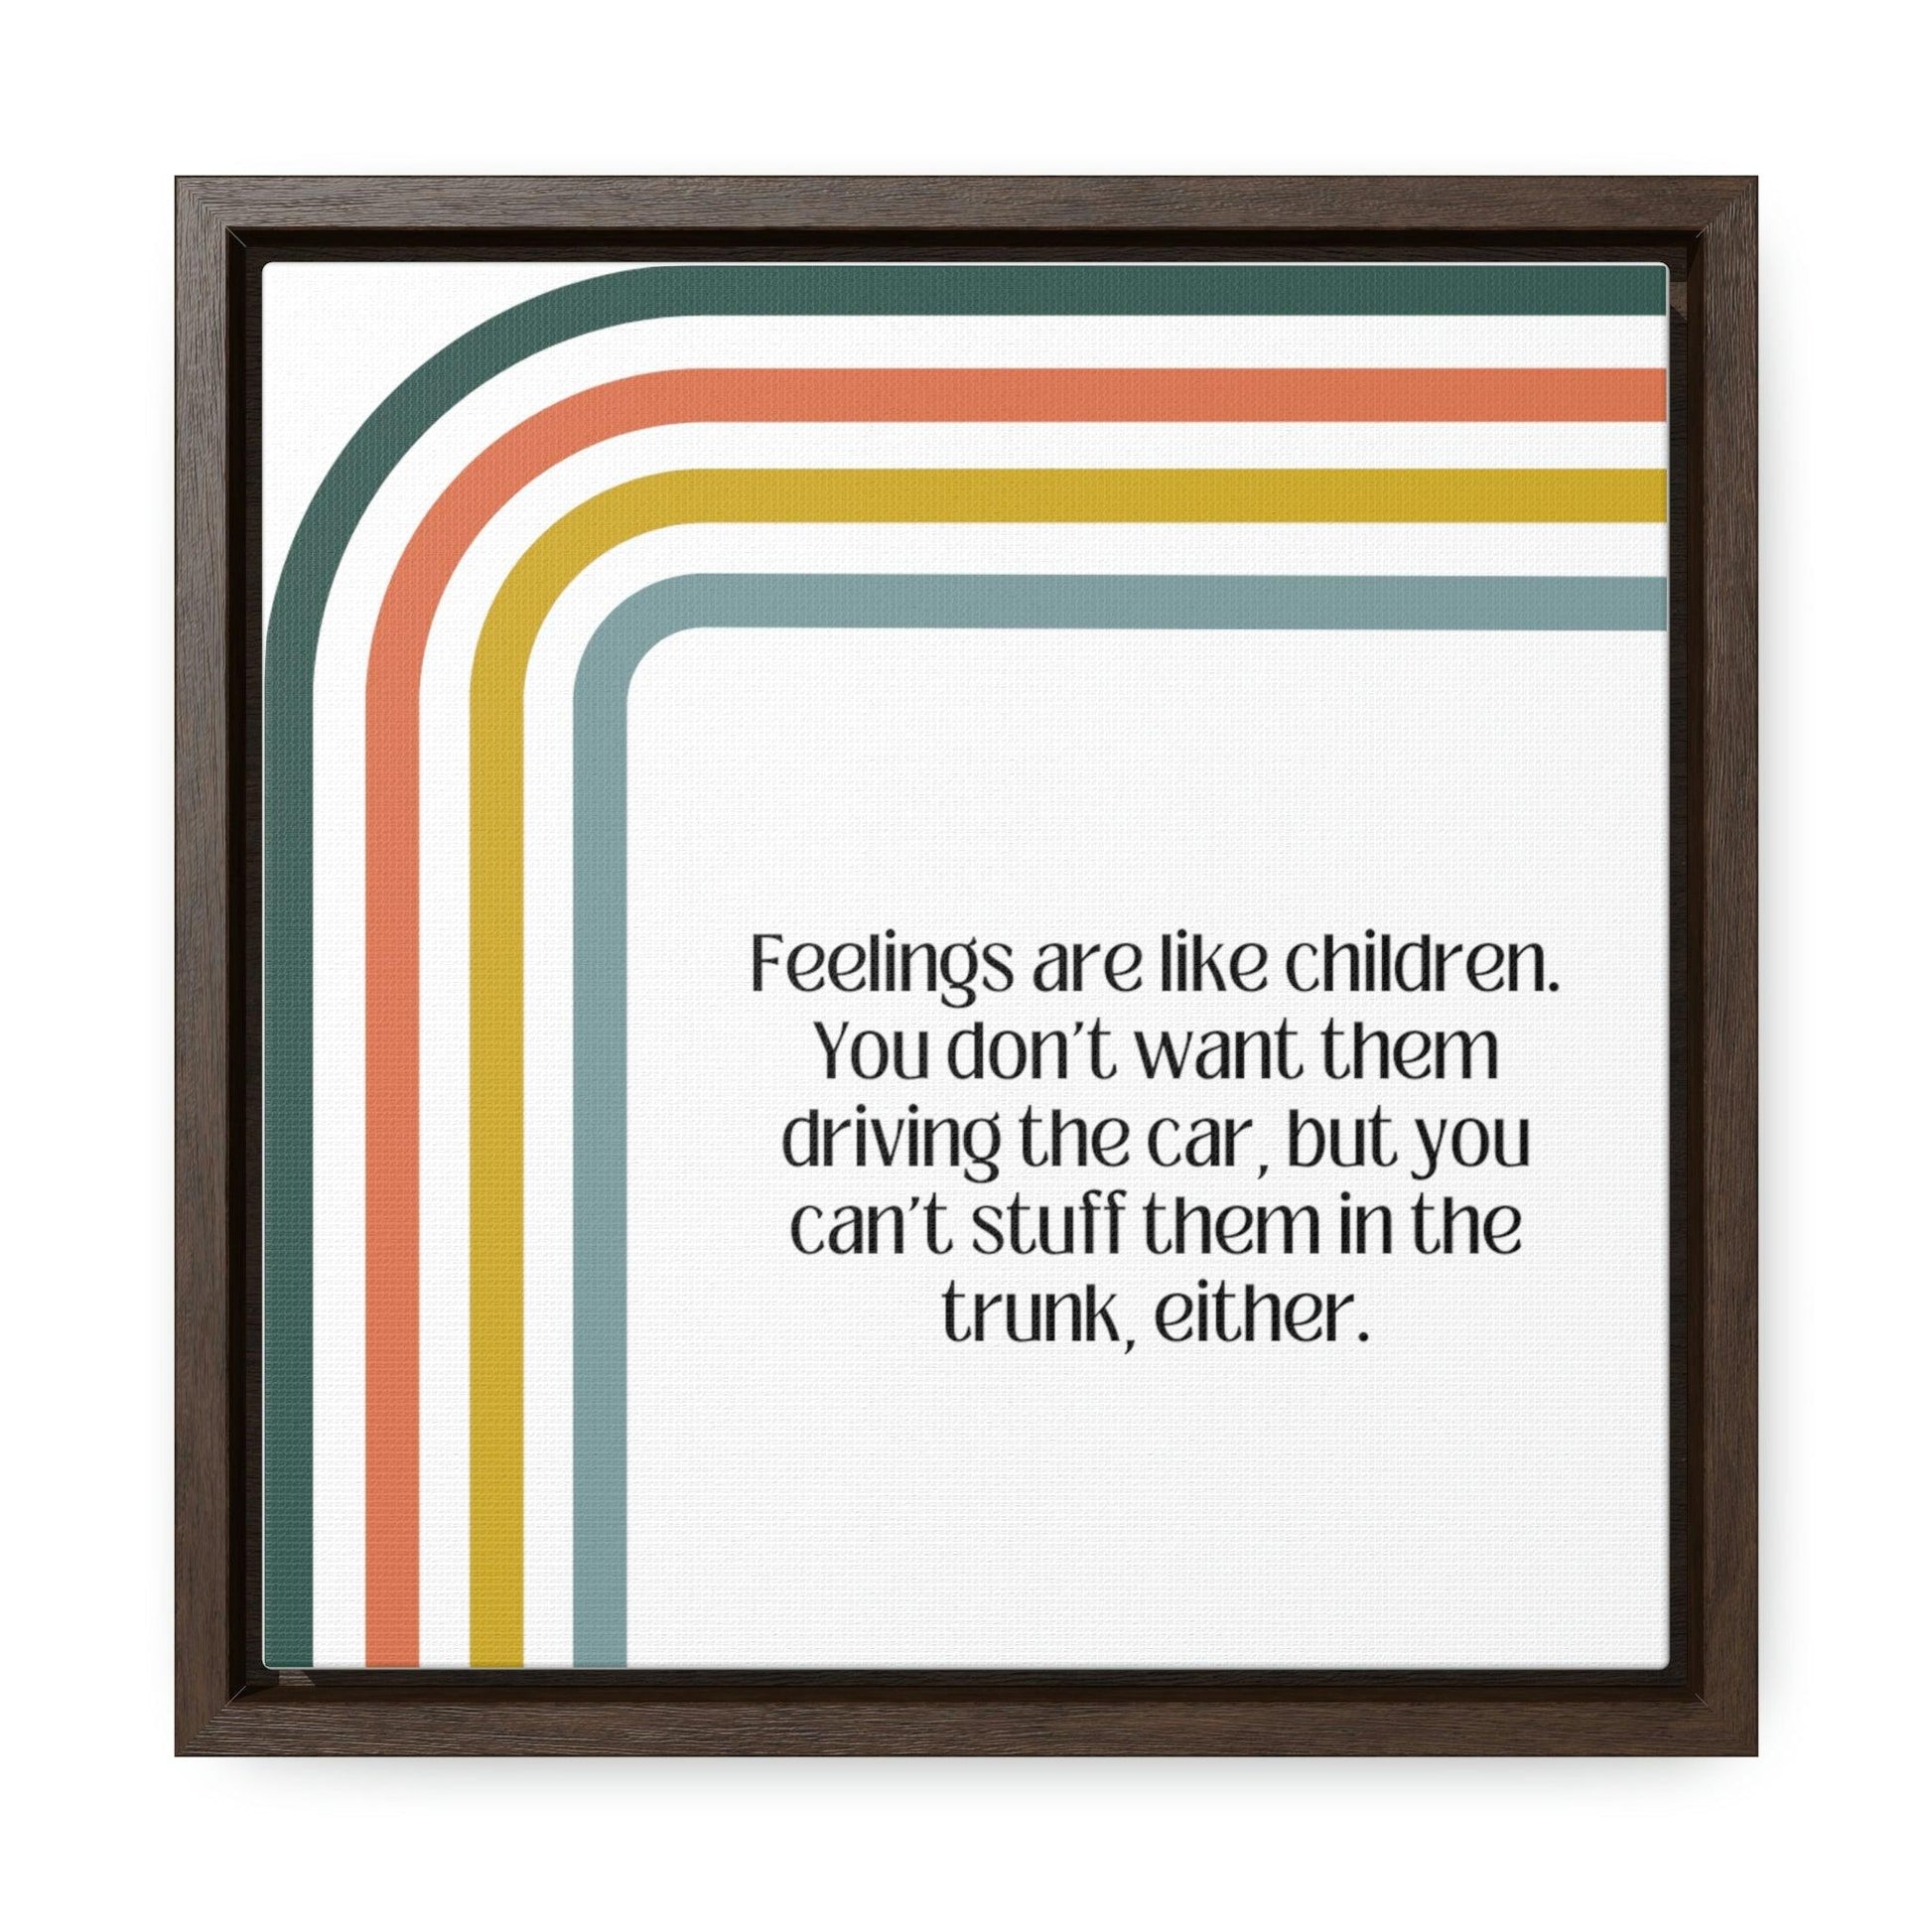 Feelings are like children - Gallery Canvas Wraps, Square Frame - Moxie Graphics